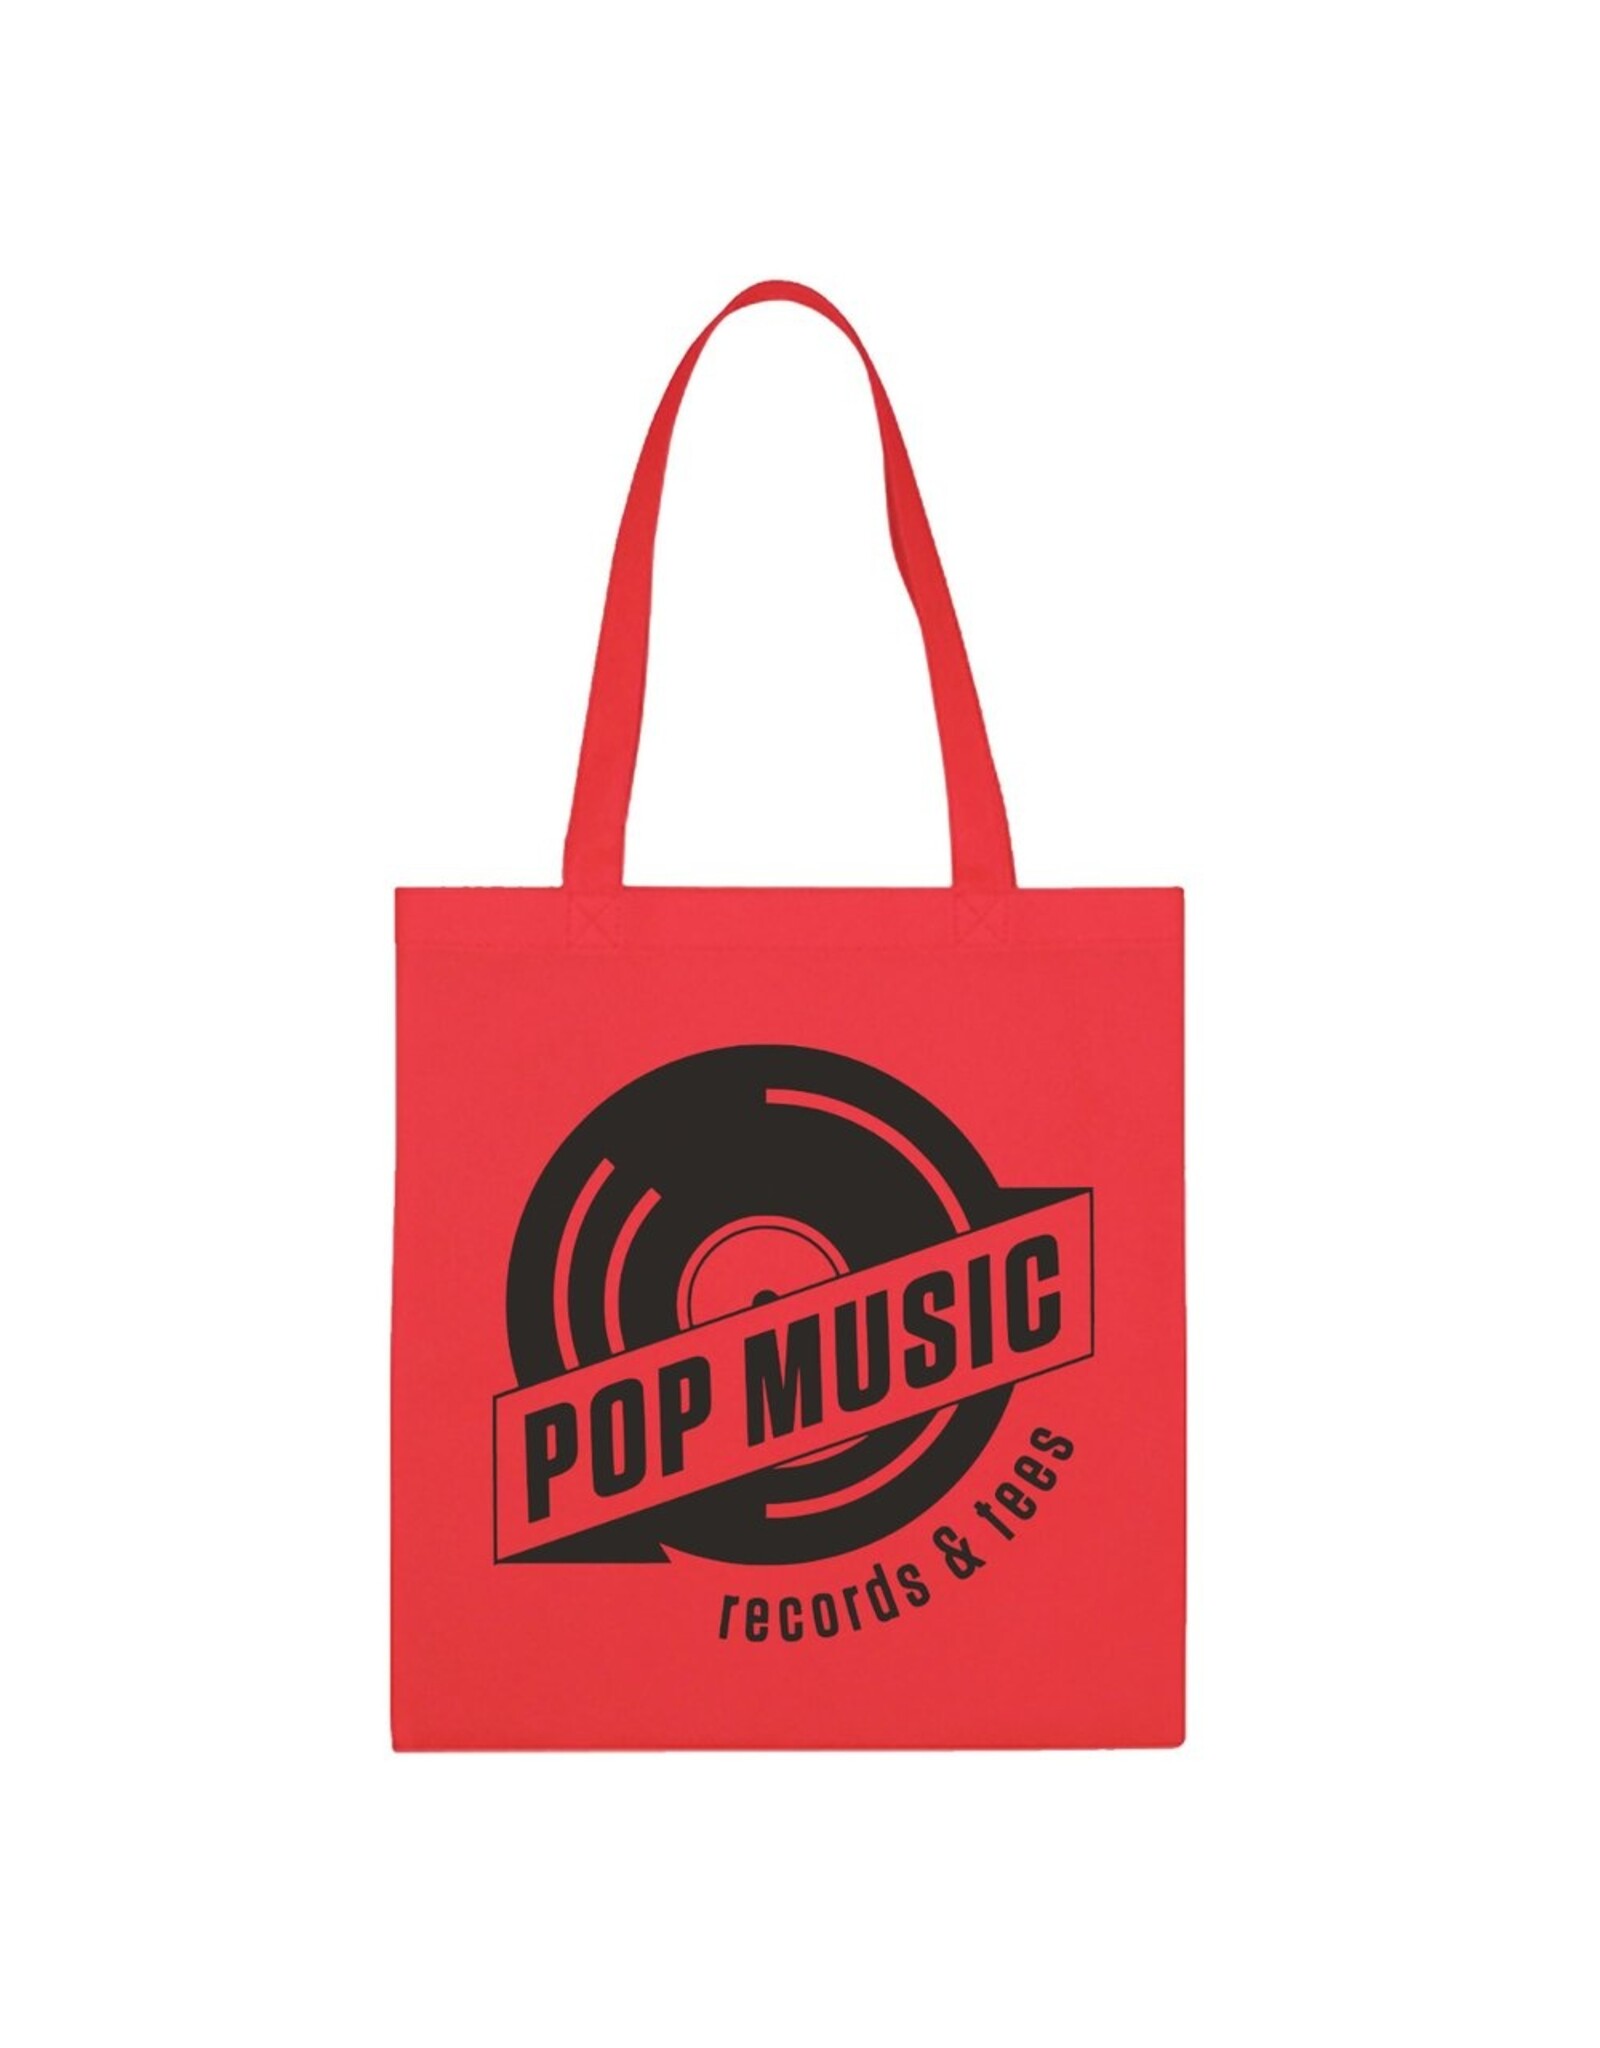 Pop Music Charity Tote